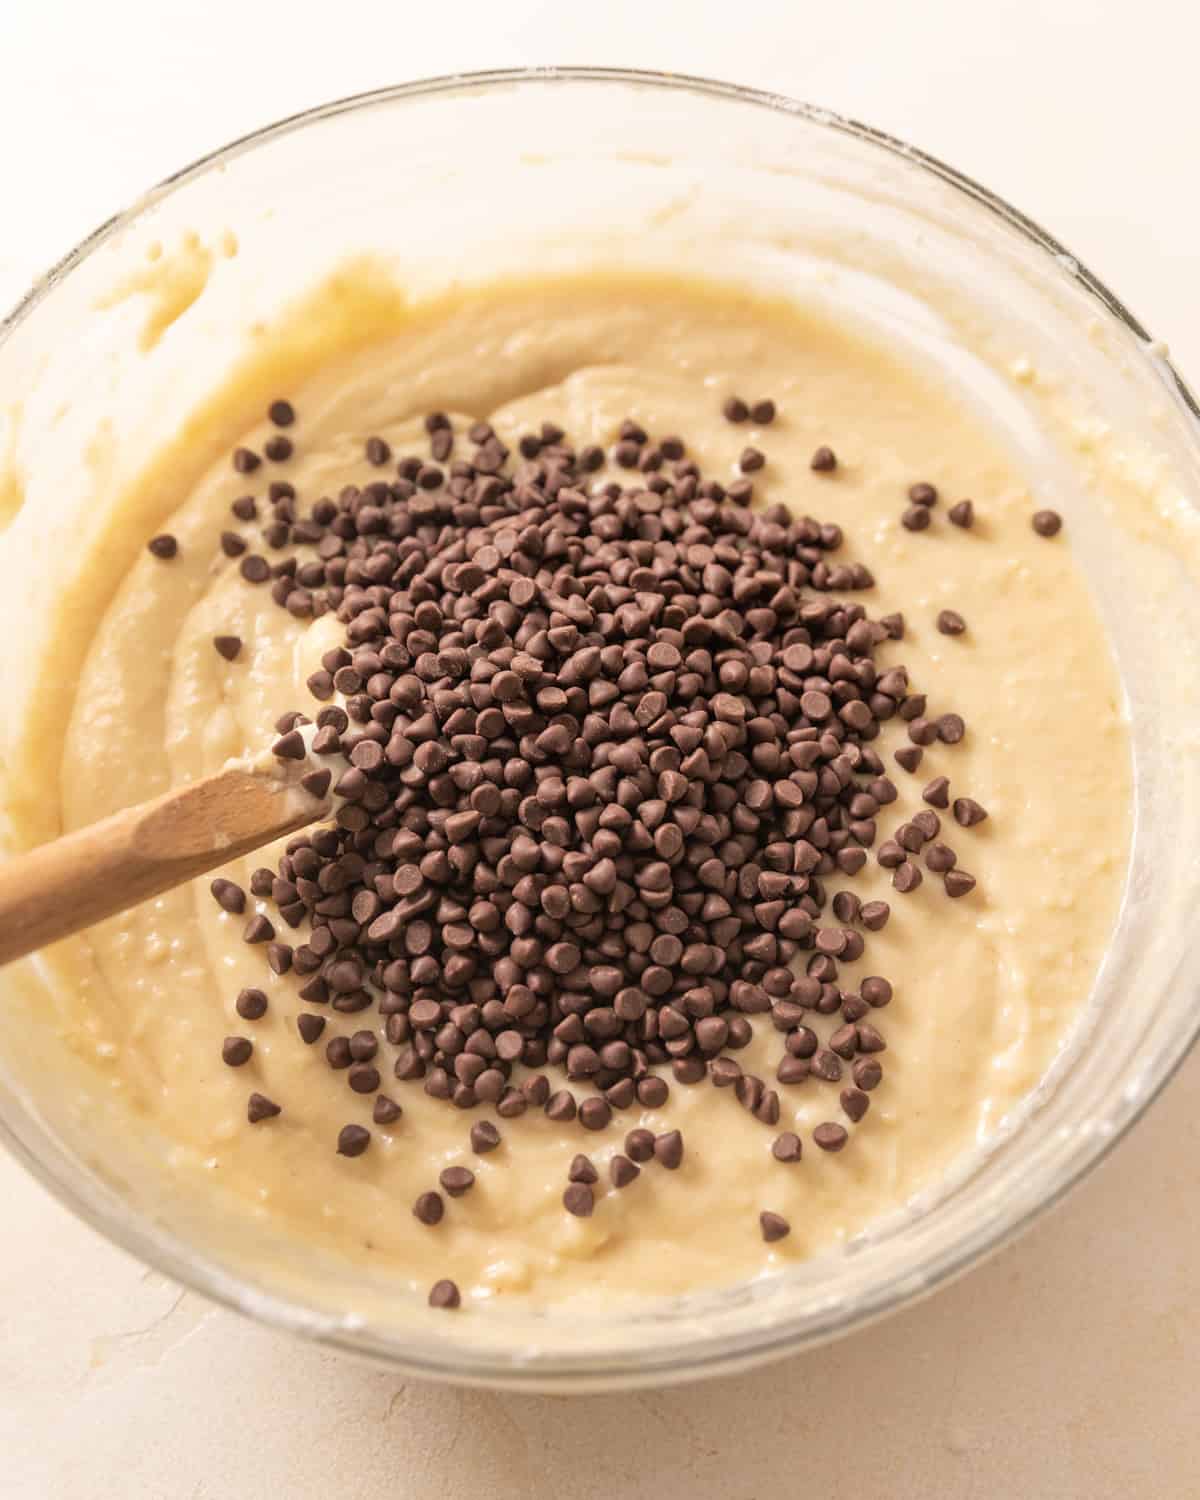 muffin batter in a bowl with chocolate chips